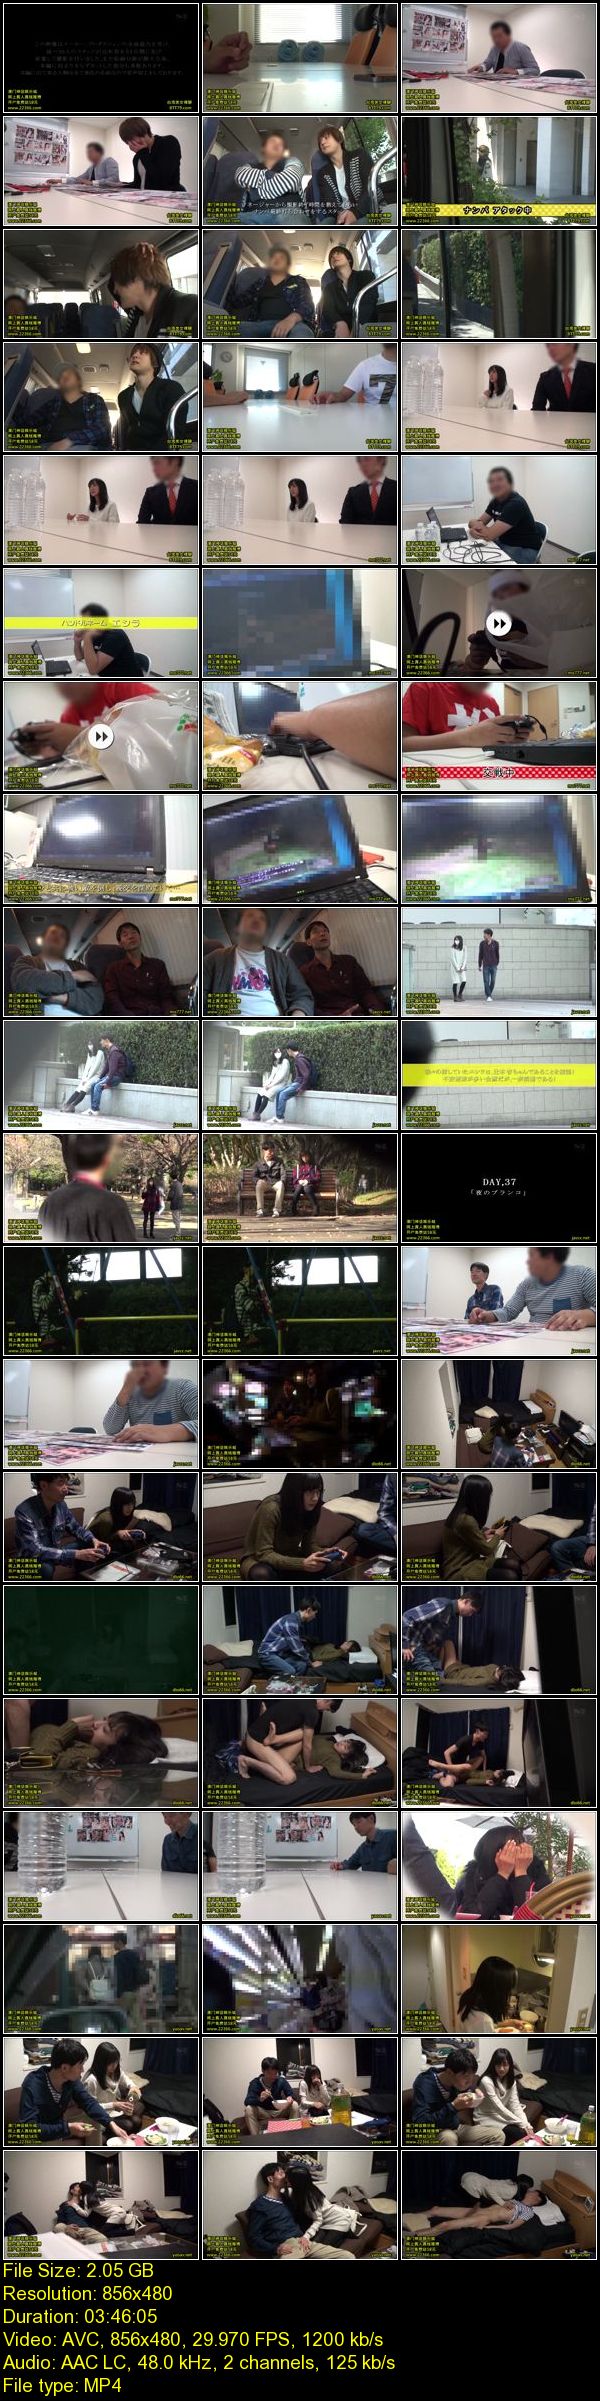 Download Japanese Adult Video An Tsujimoto [SNIS 868] 盗撮リアルドキュメント！ 独占スクープ密着54日間 ... S１　NO．１　STYLE 220分 2017 03 13